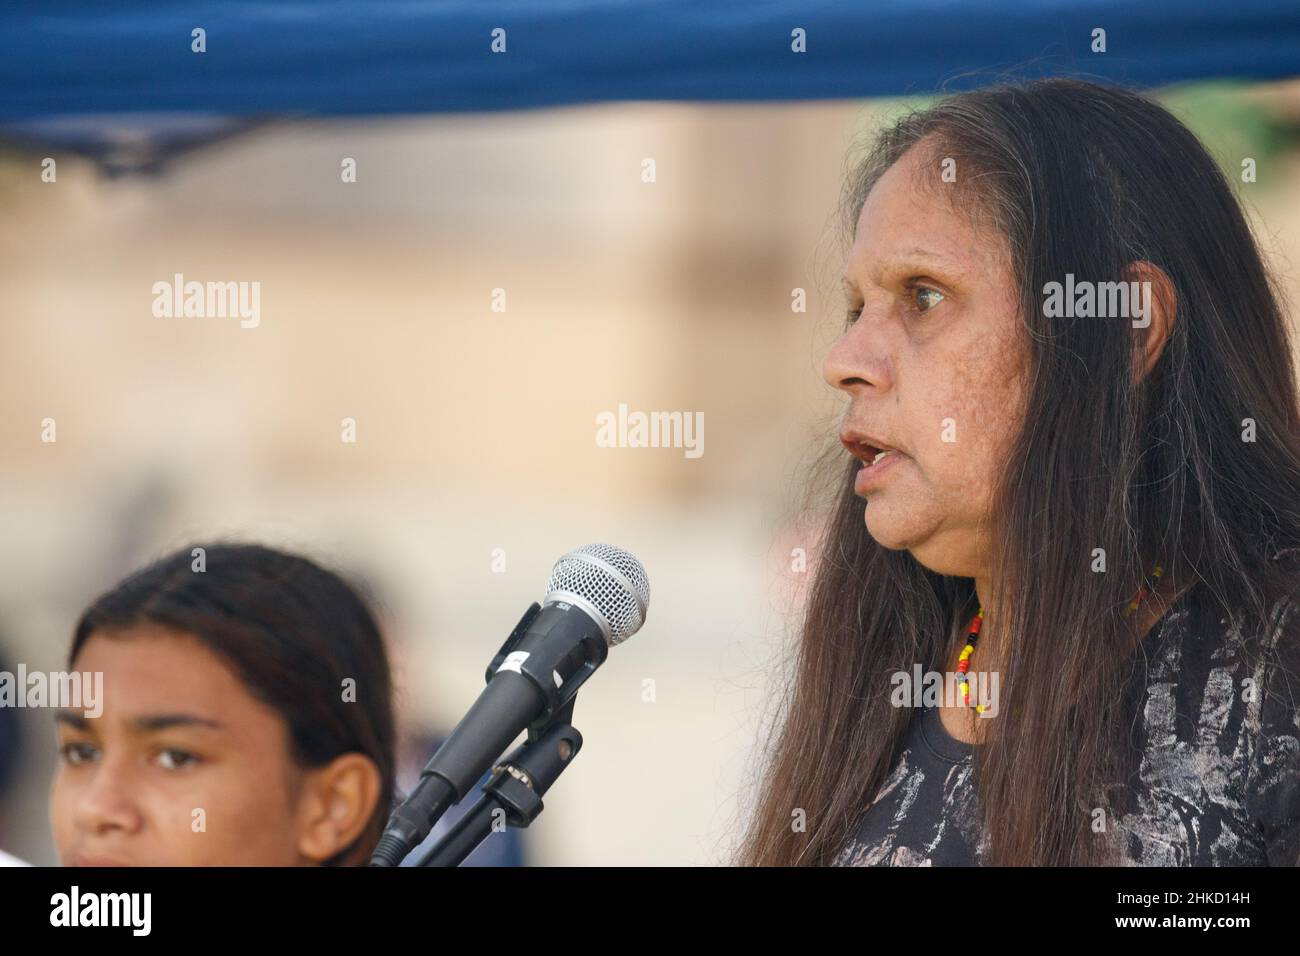 Aboriginal protester Deb Sandy speaks to the crowd during the rally at Queens Gardens.Protesters took to the streets of Brisbane, Queensland, Australia on the 26th January, the Australia Day (often referred to as Invasion Day): a date synonymous with the beginning of the persecution of Aboriginal people to call for action on important issues for First Nations people and for proper recognition of crimes historically perpetrated against them. Several elders spoke at Queens Gardens before the crowd marched through the city and over the bridge to Musgrave Park in South Brisbane. (Photo by Joshua P Stock Photo